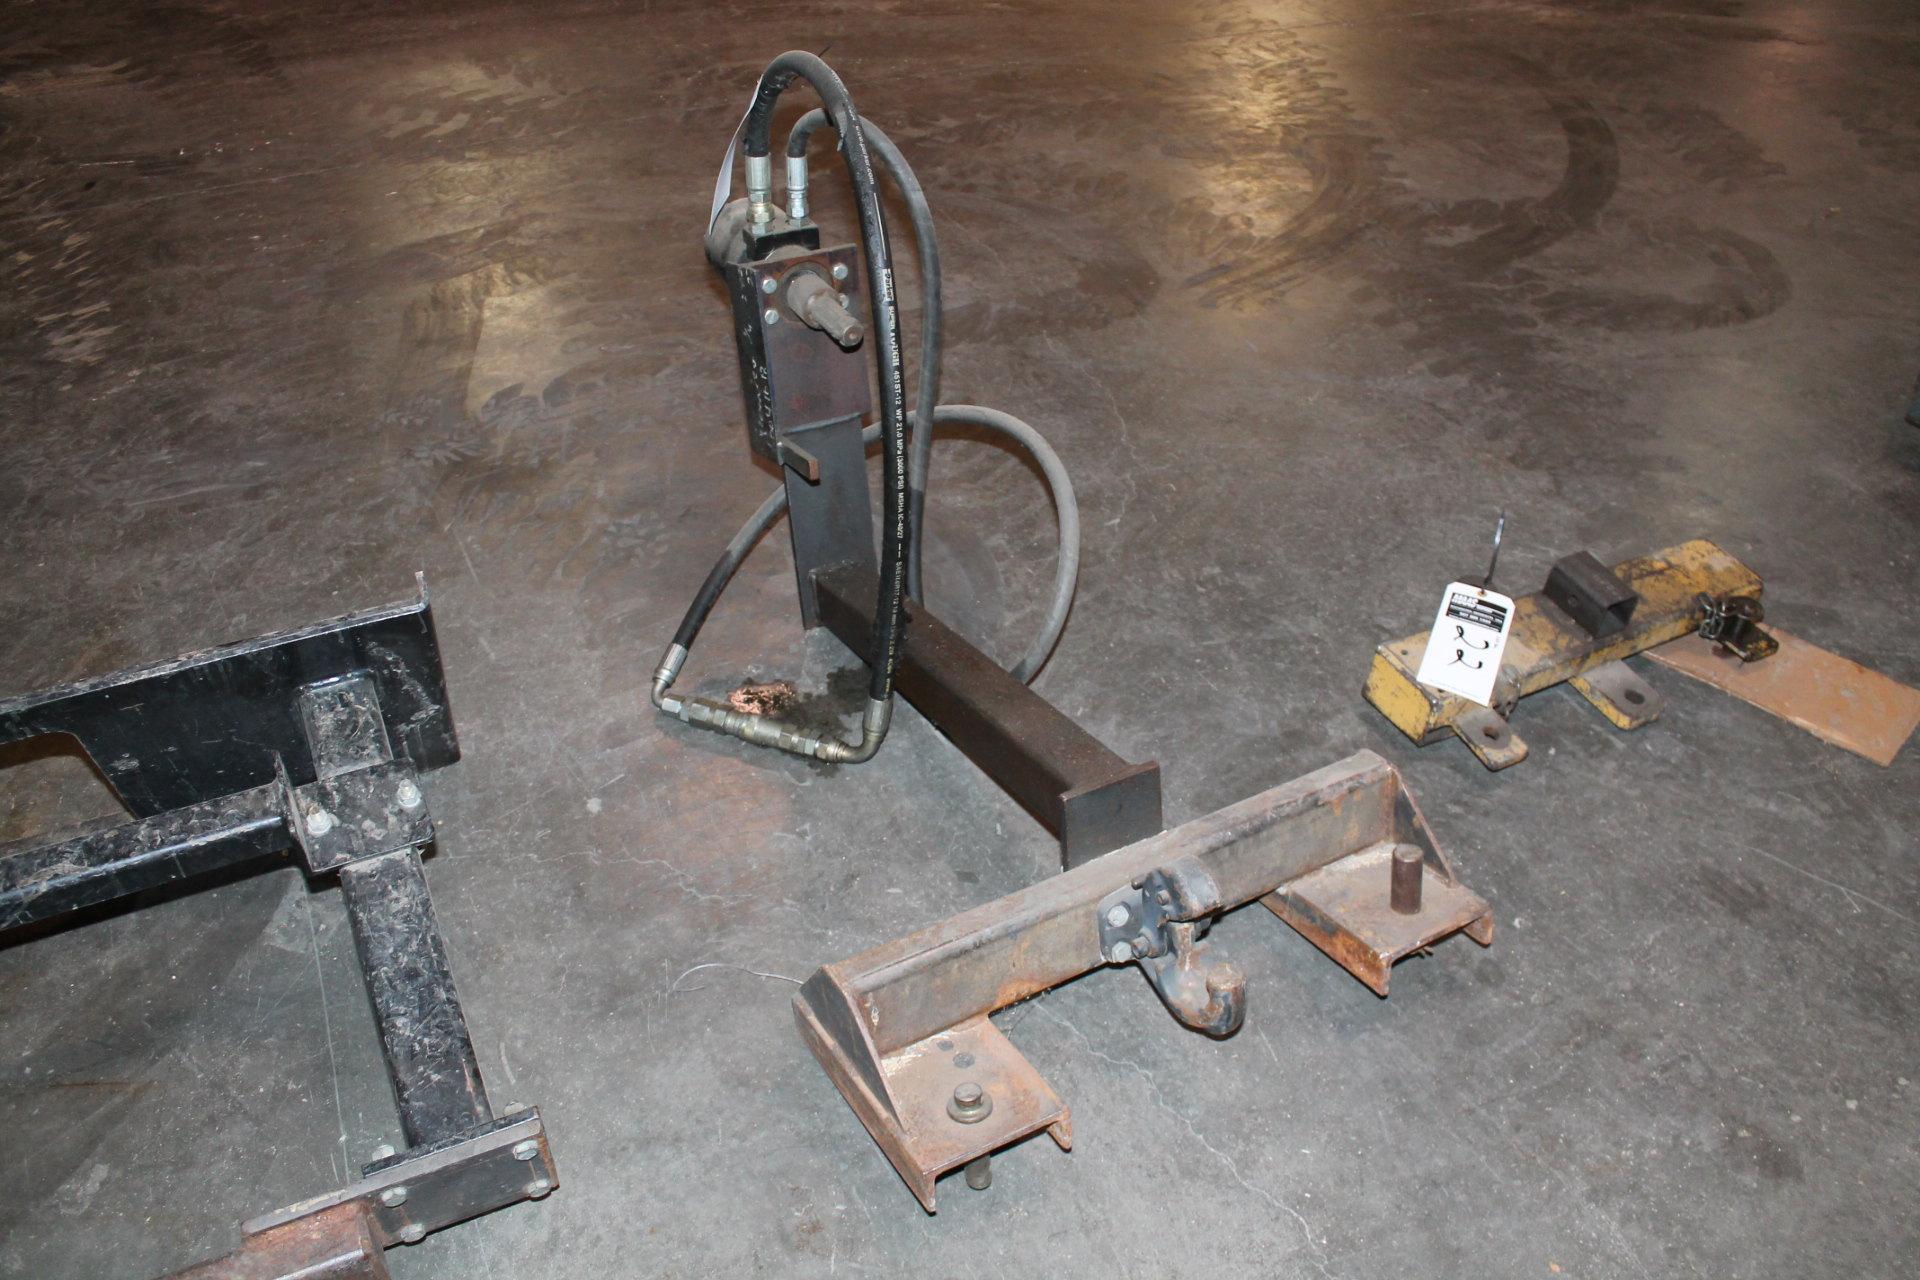 HYDRAULIC POWER SUPPLY AND TOW BAR ATTACHMENT